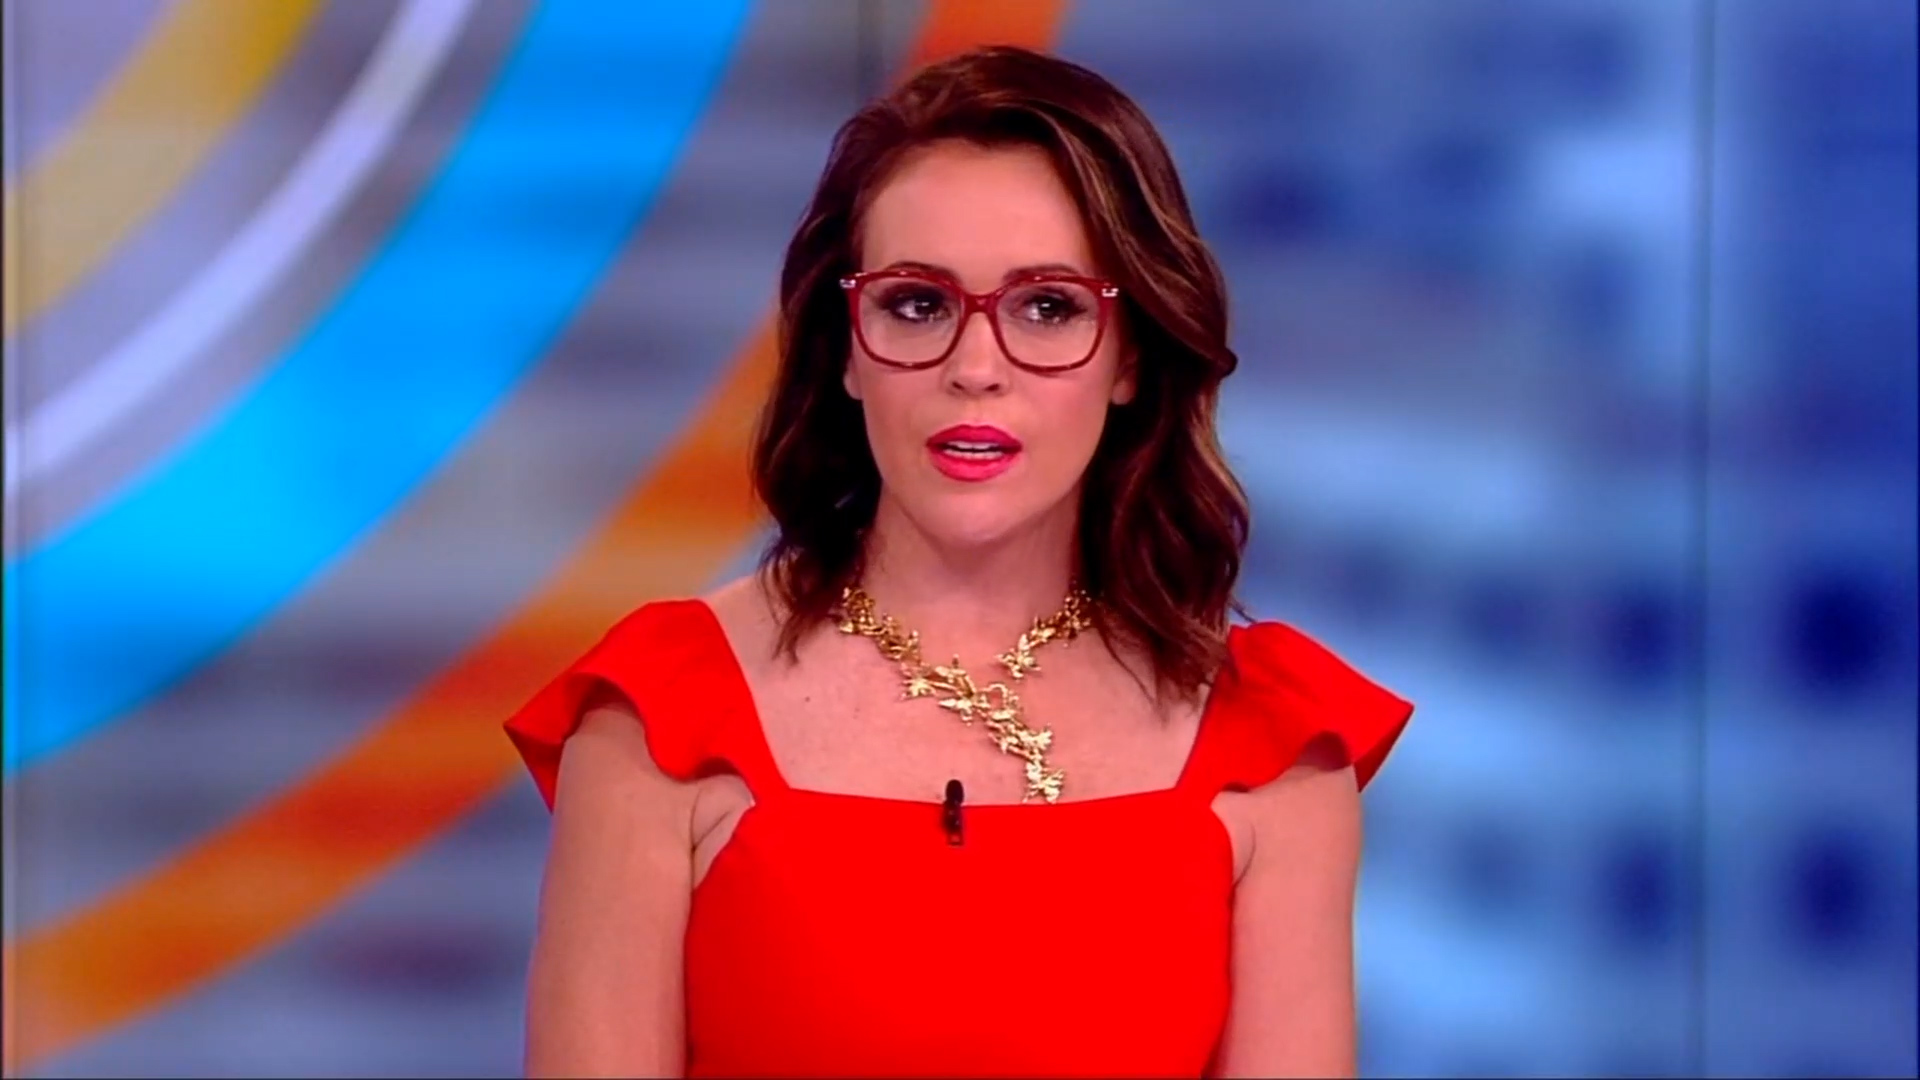 Alyssa milano reveals she was hospitalized on the view